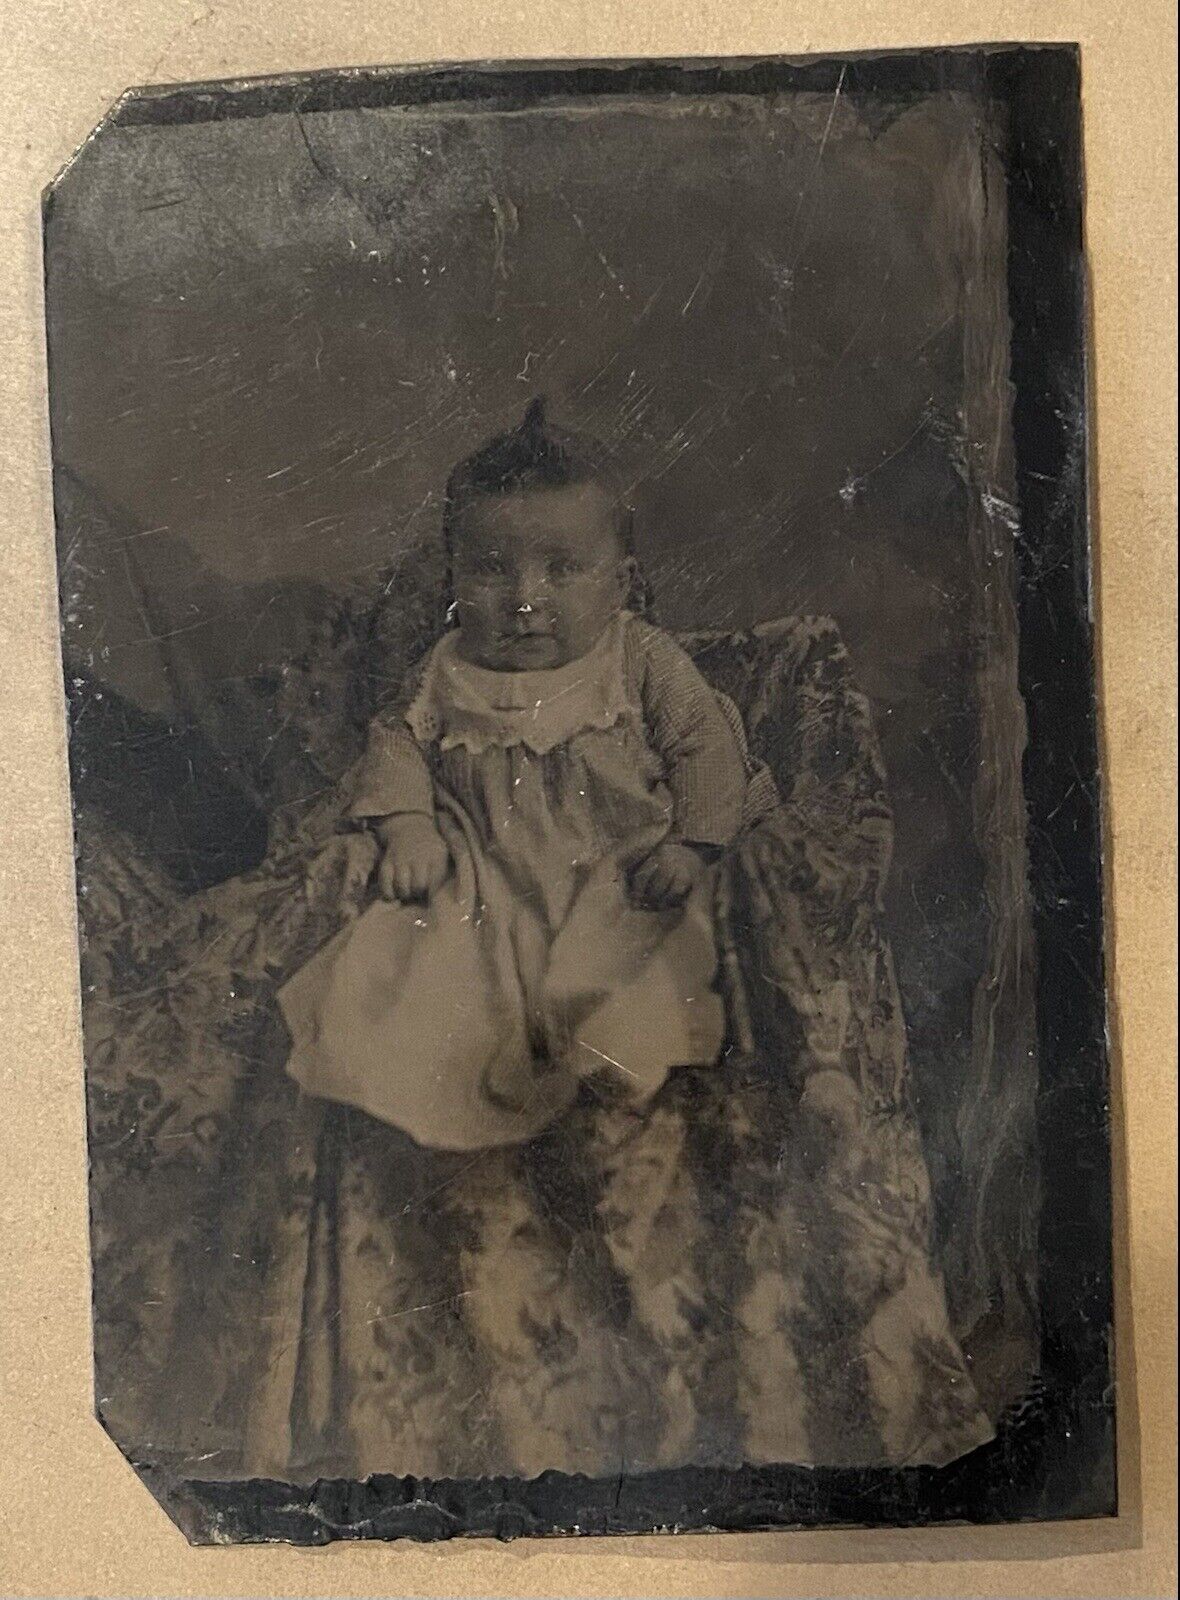 collectable daguerreotype Tintype  post mortem Baby Photograph 1800’s